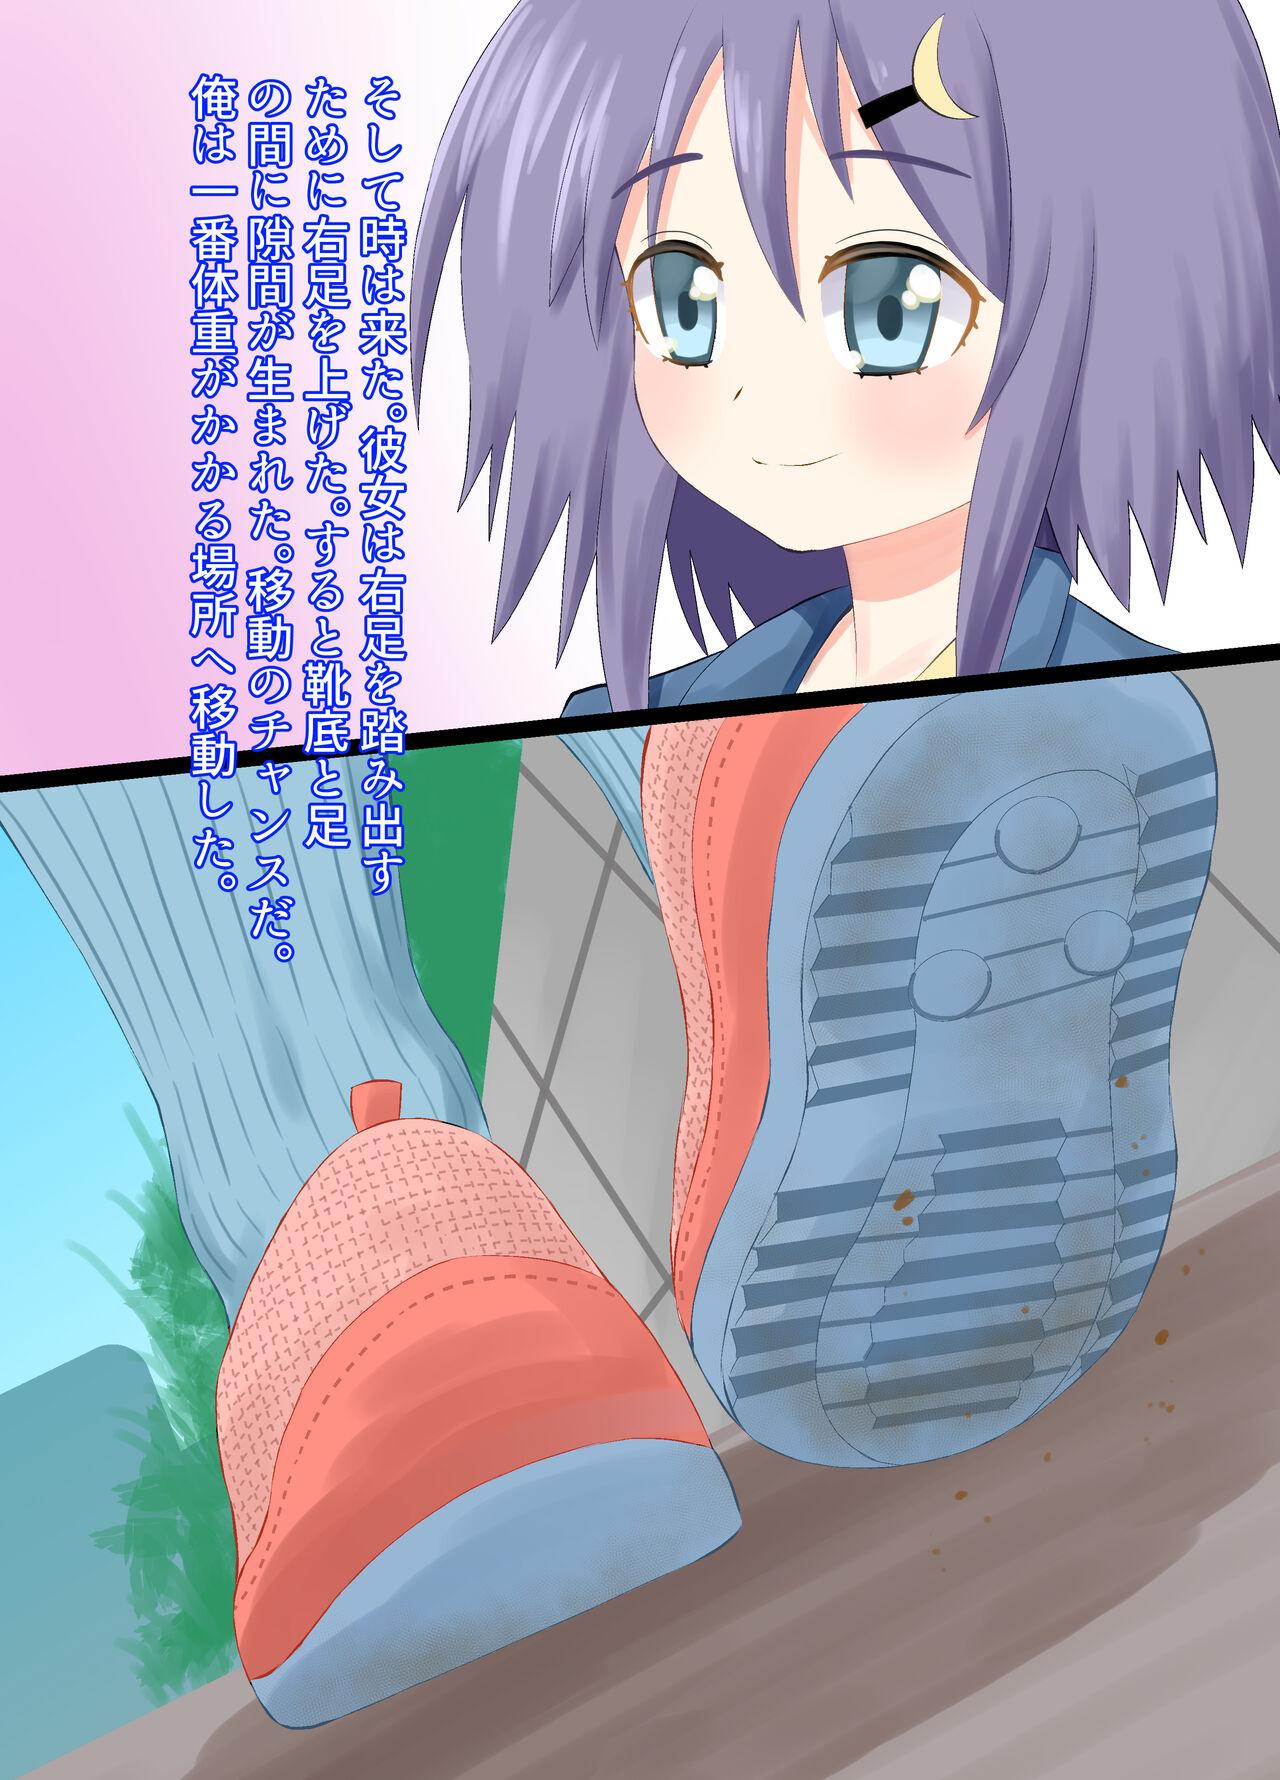 A CG collection of getting smaller and being stepped on by a girl 35